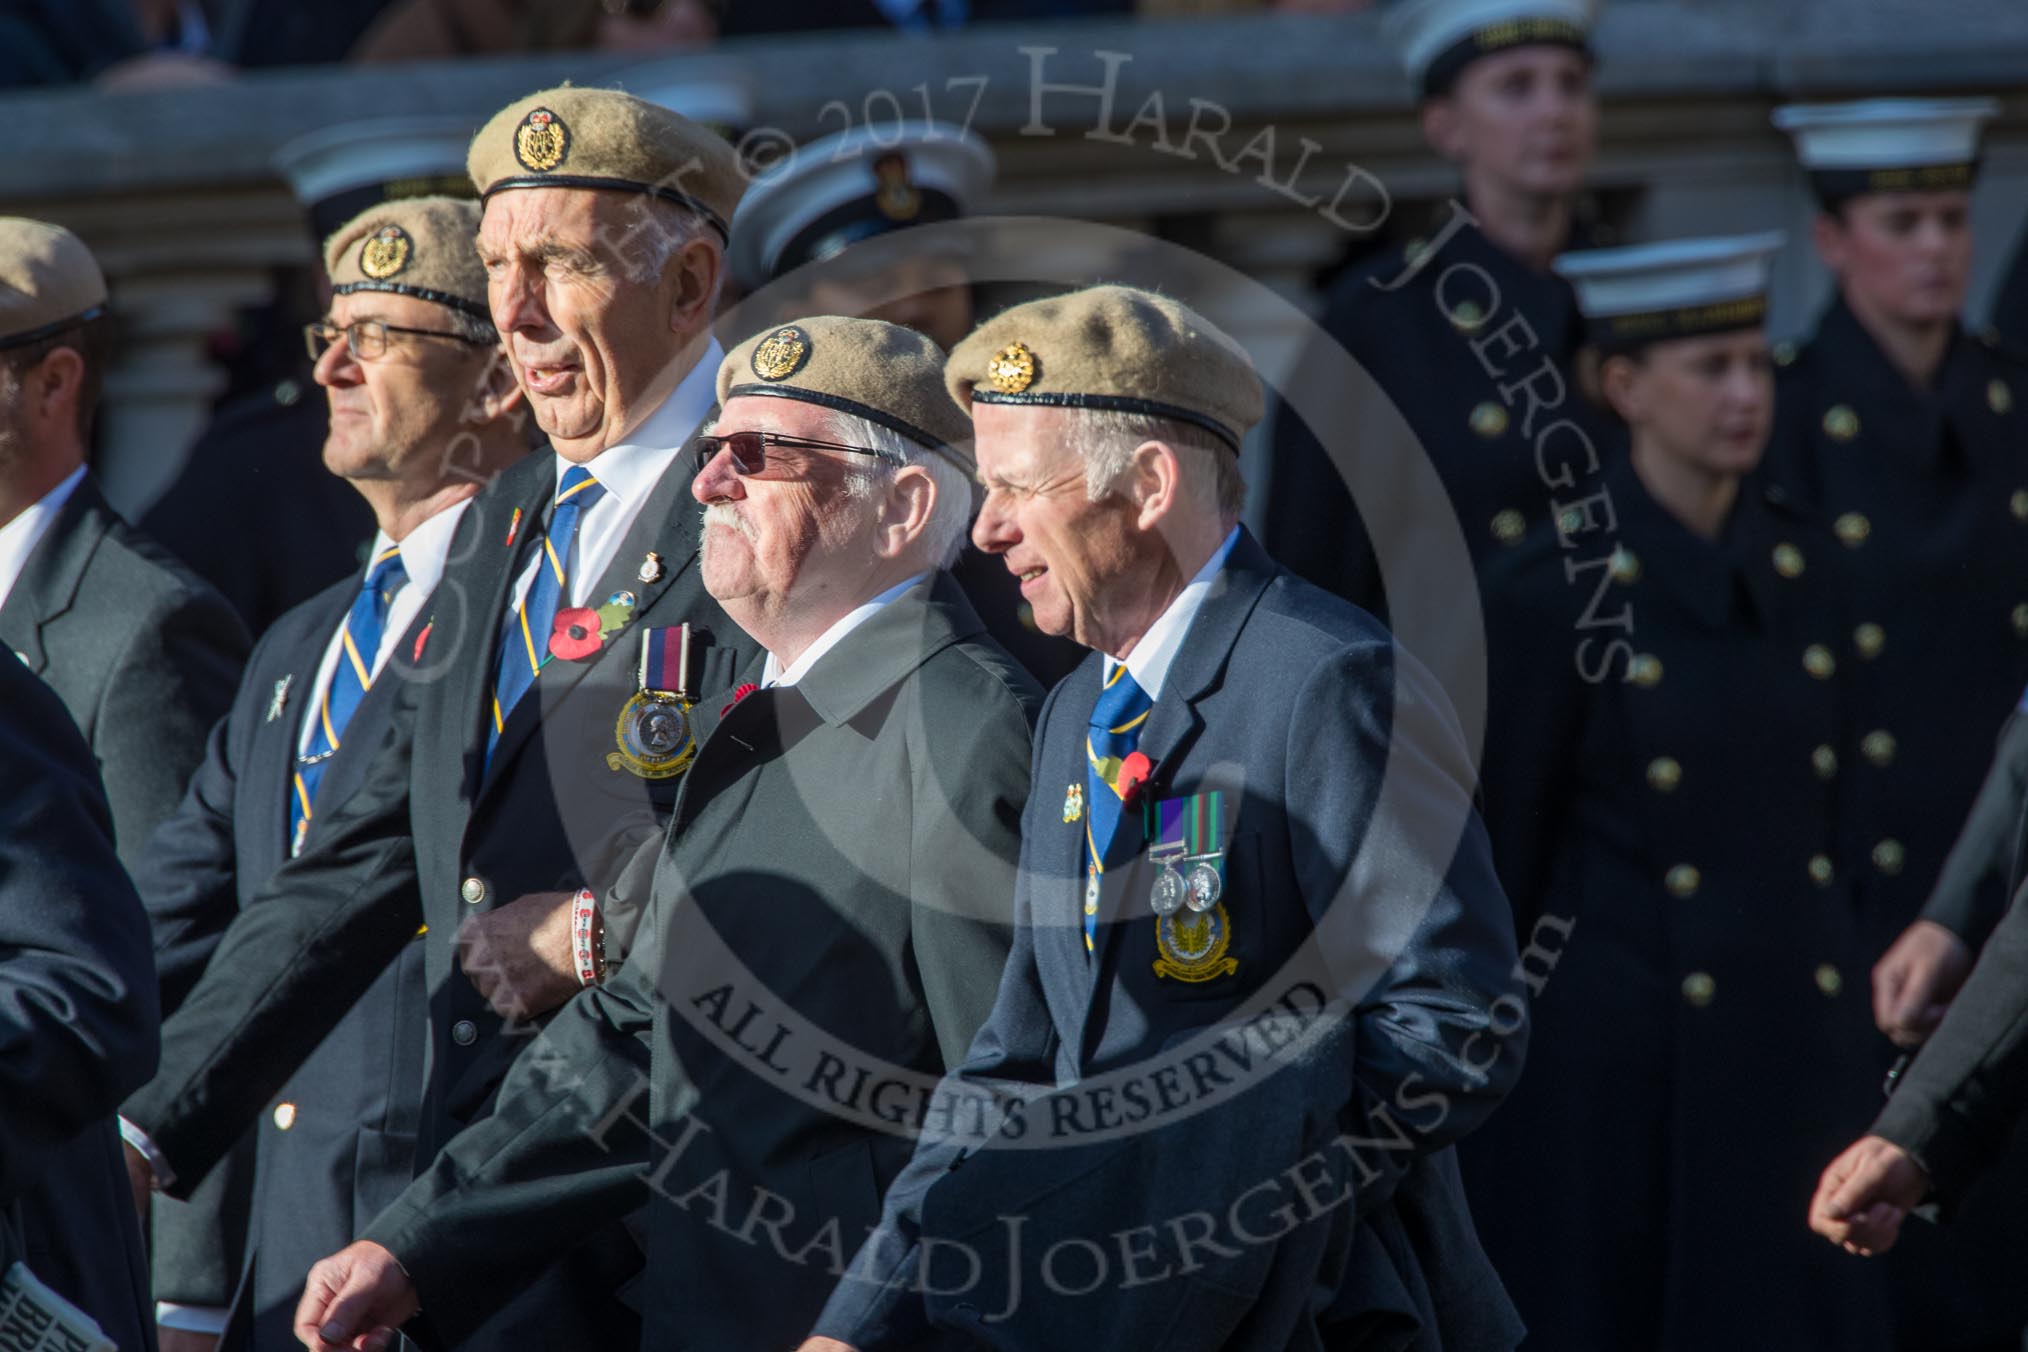 The RAF Masirah & RAF Salalah Veterans Association (Group C35, 20 members) during the Royal British Legion March Past on Remembrance Sunday at the Cenotaph, Whitehall, Westminster, London, 11 November 2018, 12:19.